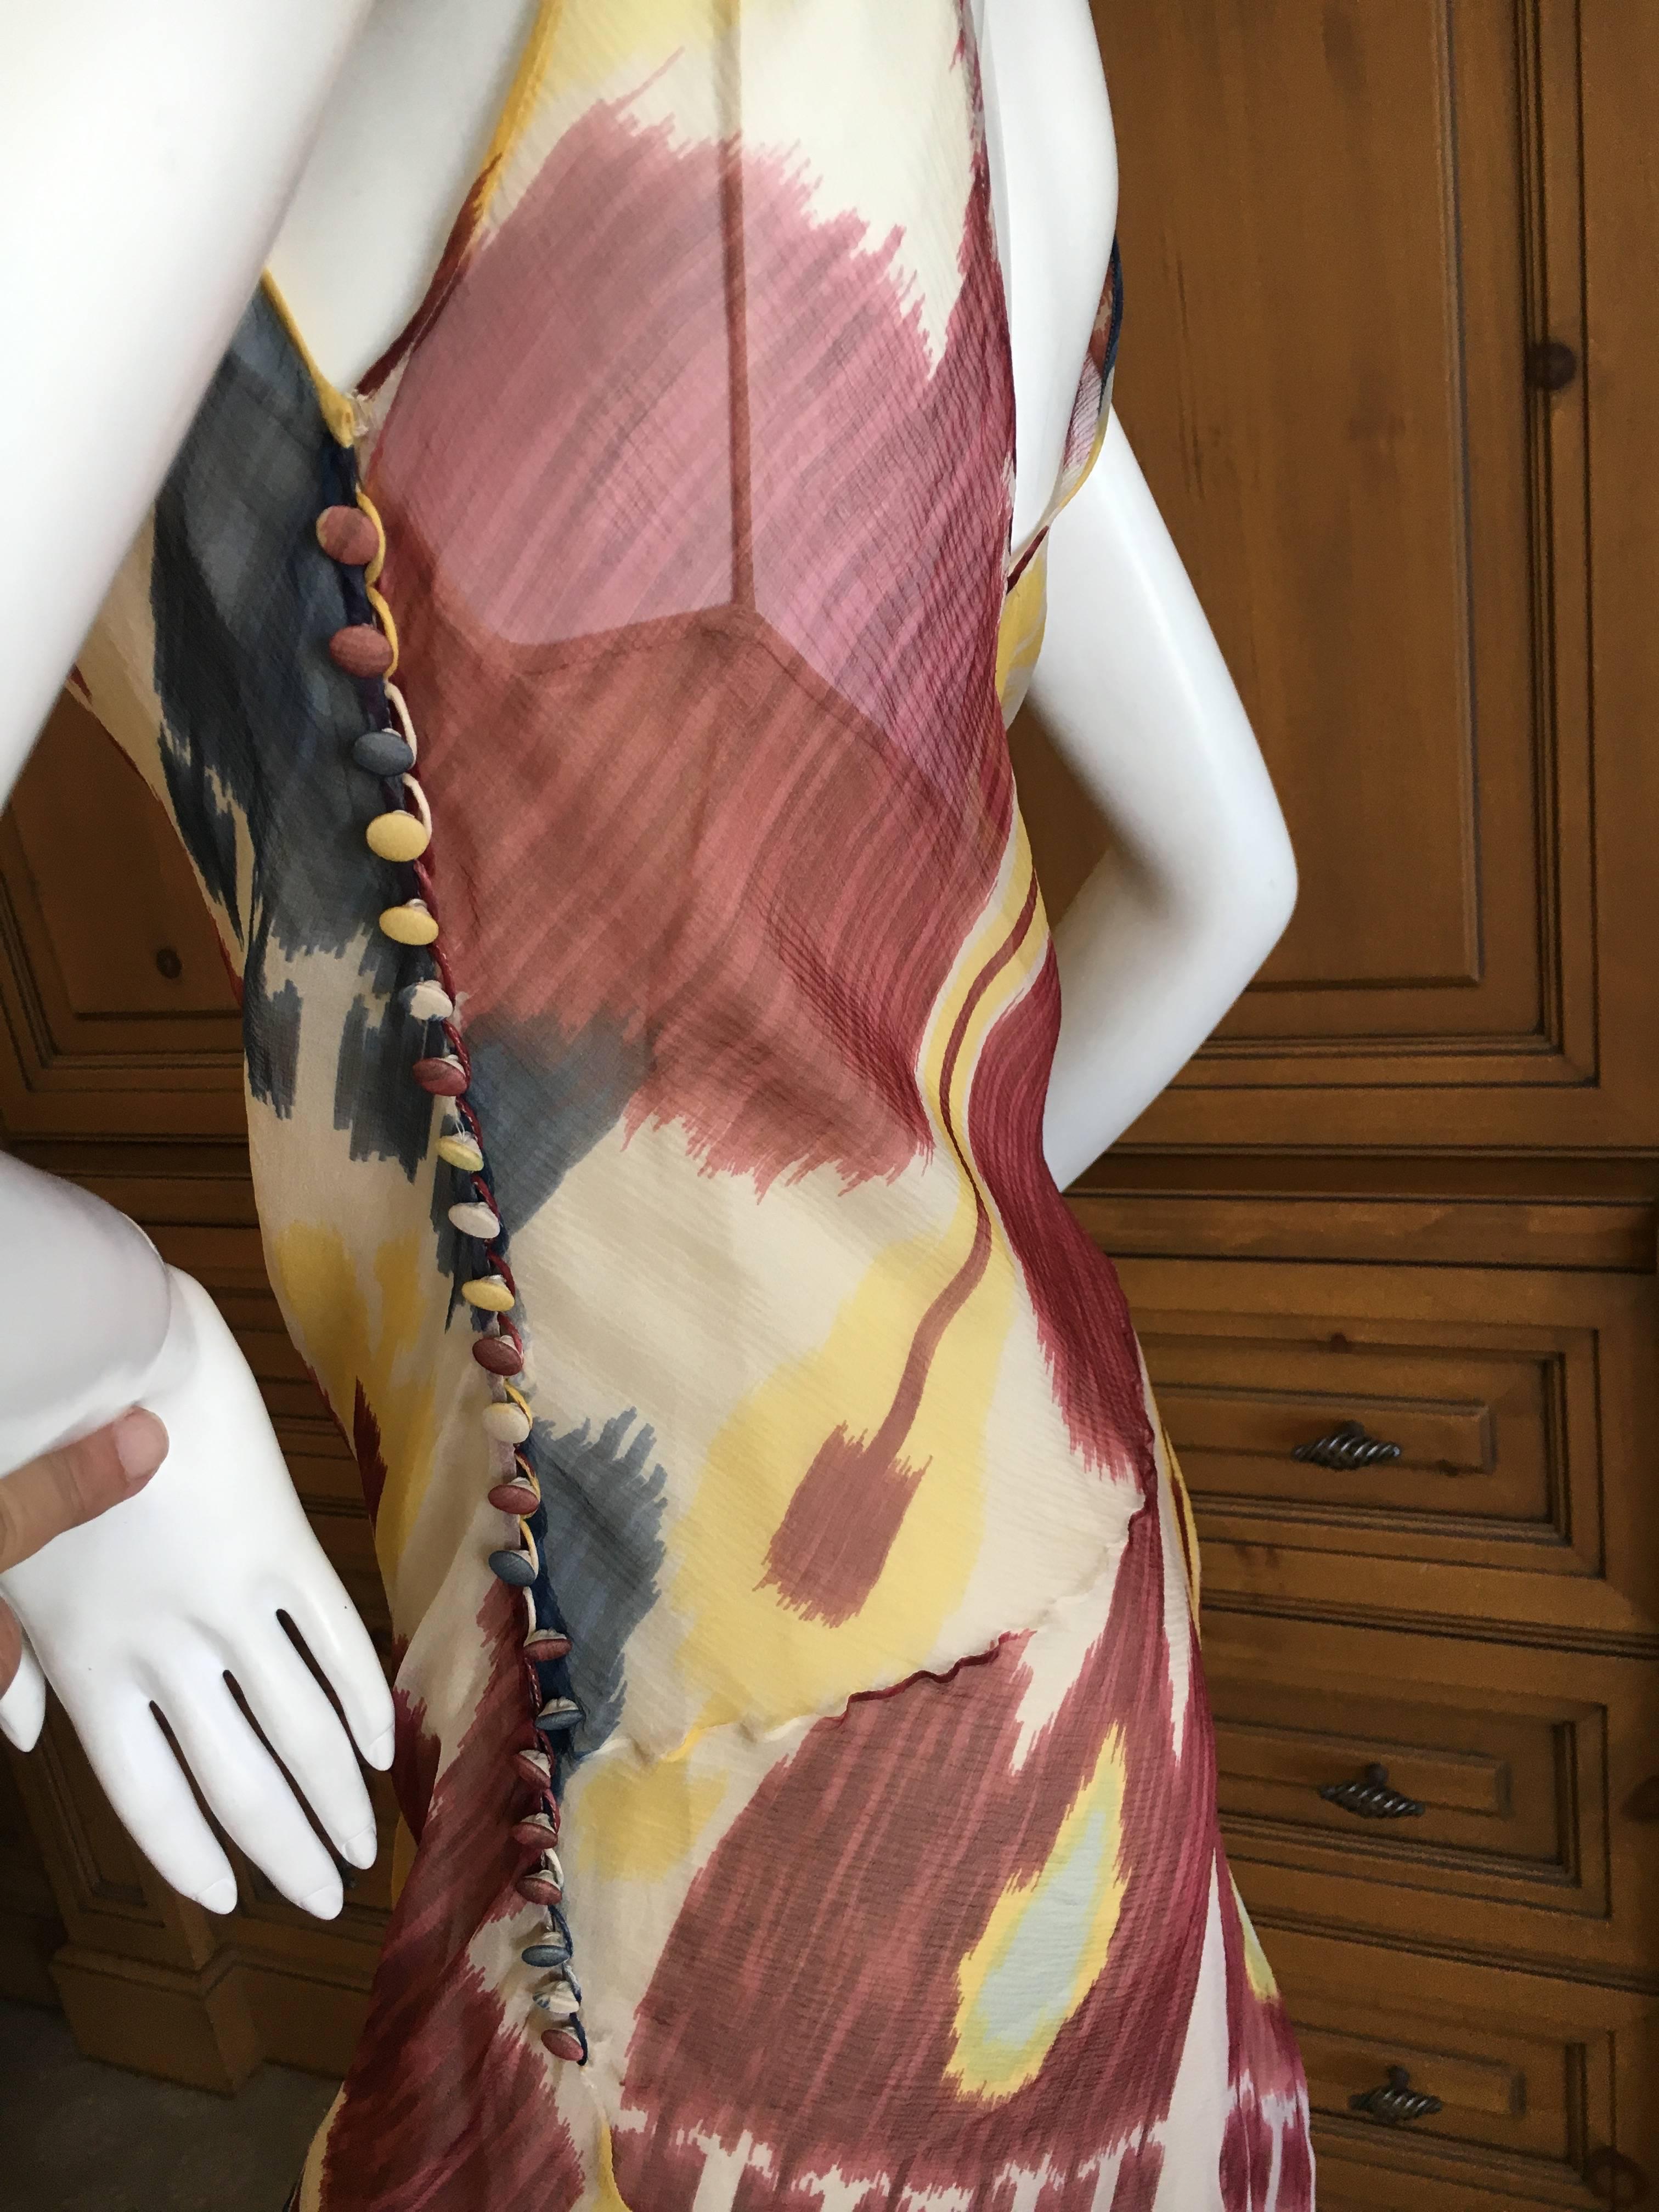 Christian Dior Sheer Silk Chiffon Ikat Print Dress by John Galliano In Excellent Condition For Sale In Cloverdale, CA